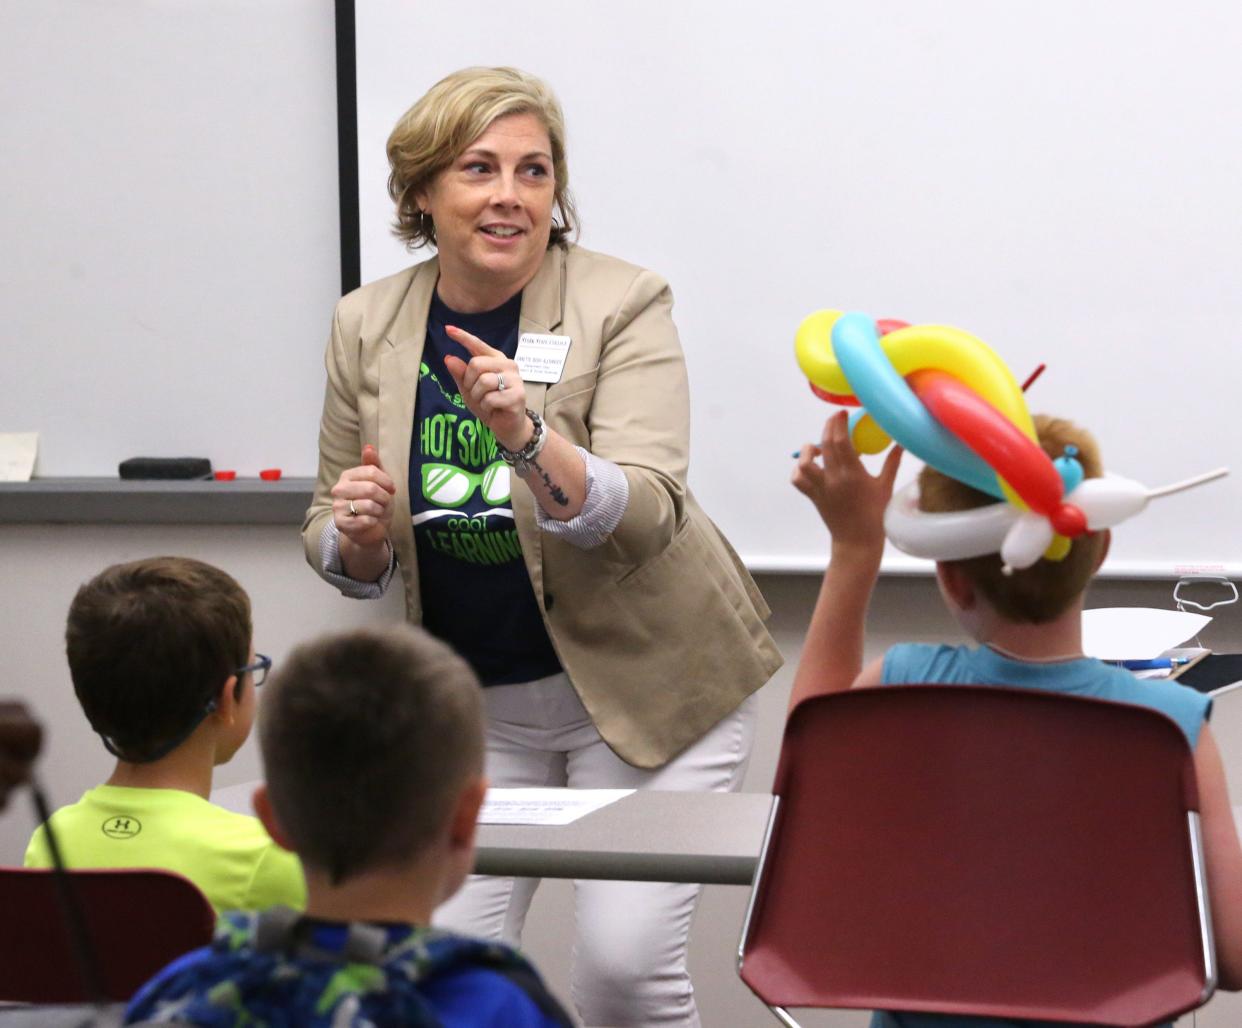 Danette Bosh Alexander leads a class called, "Magic! Magic! Magic!" during Kids' College at Stark State College in Jackson Township. She is the chair of Education and Social Sciences Department, an associate professor of education and the director of the Kids' College.